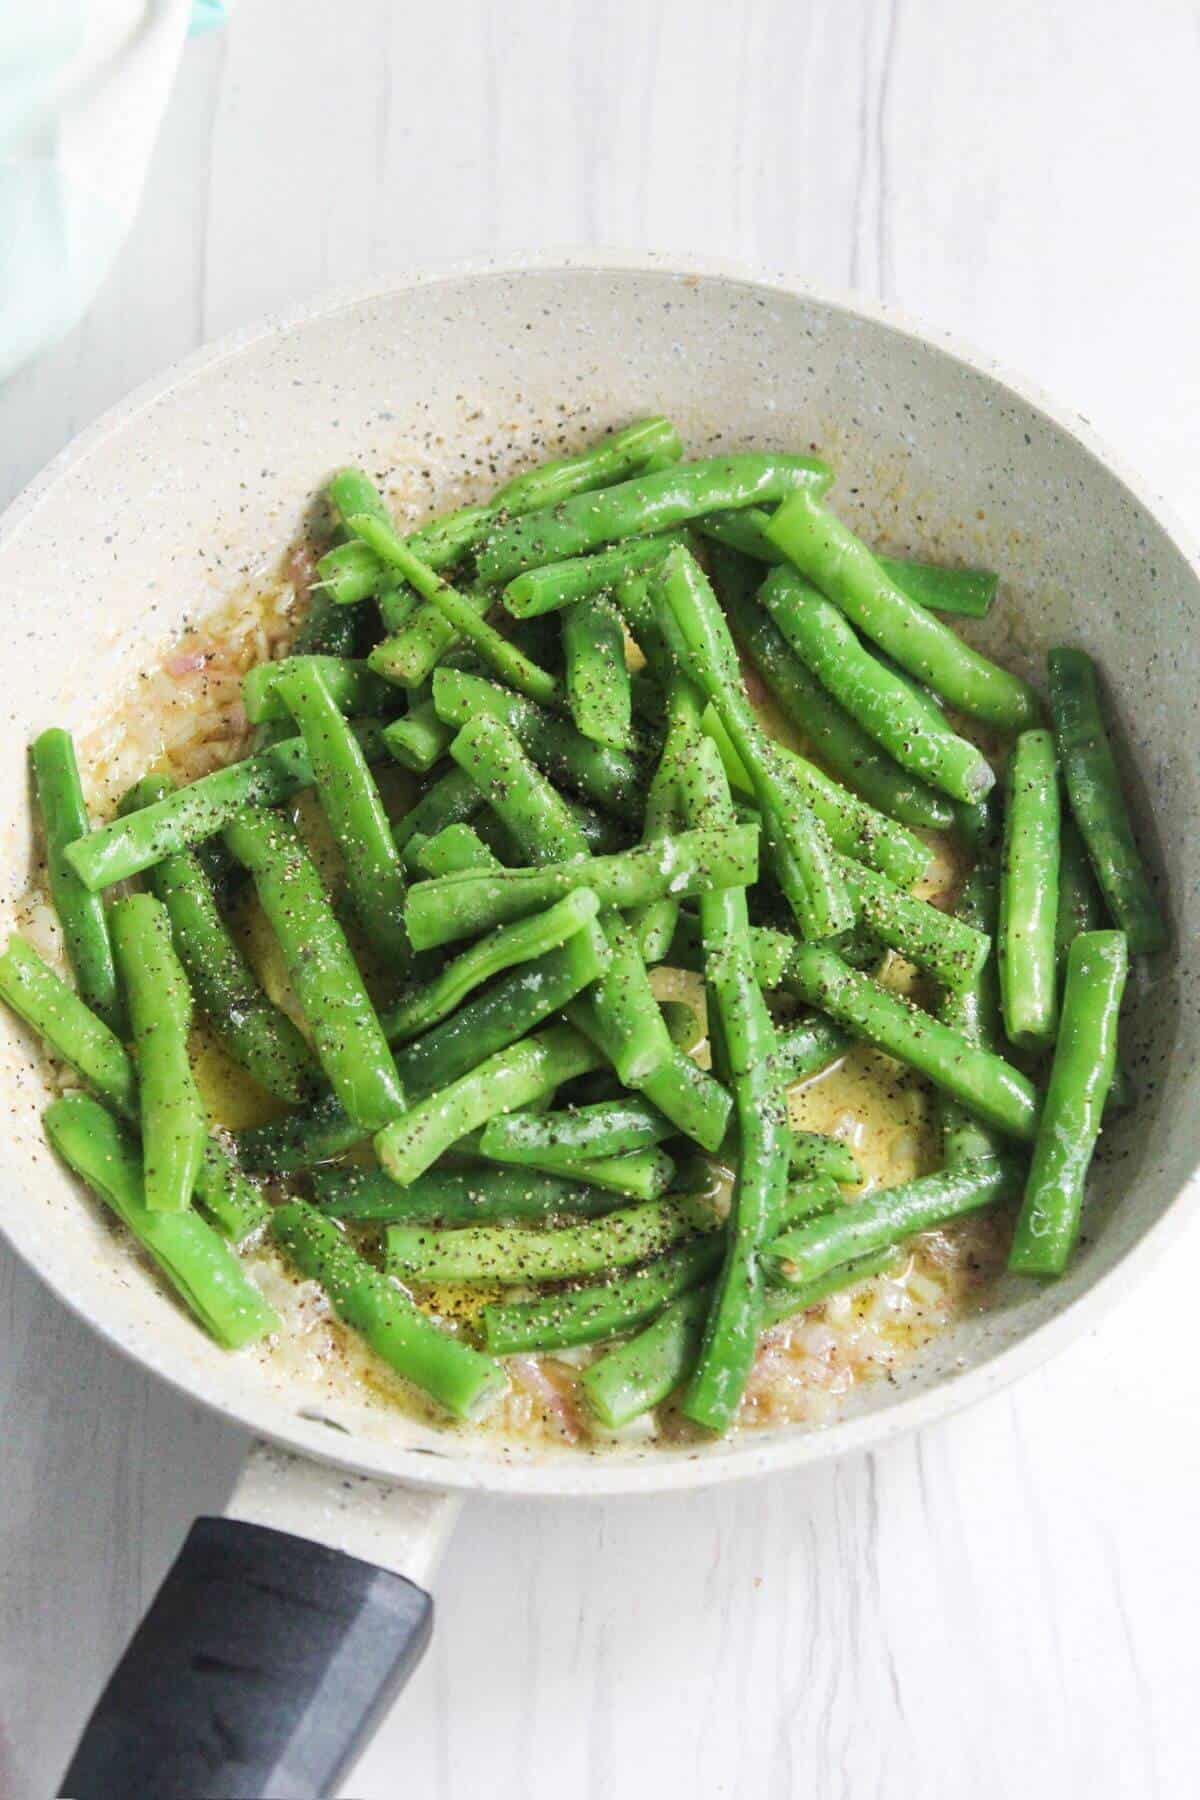 Green beans in a frying pan.